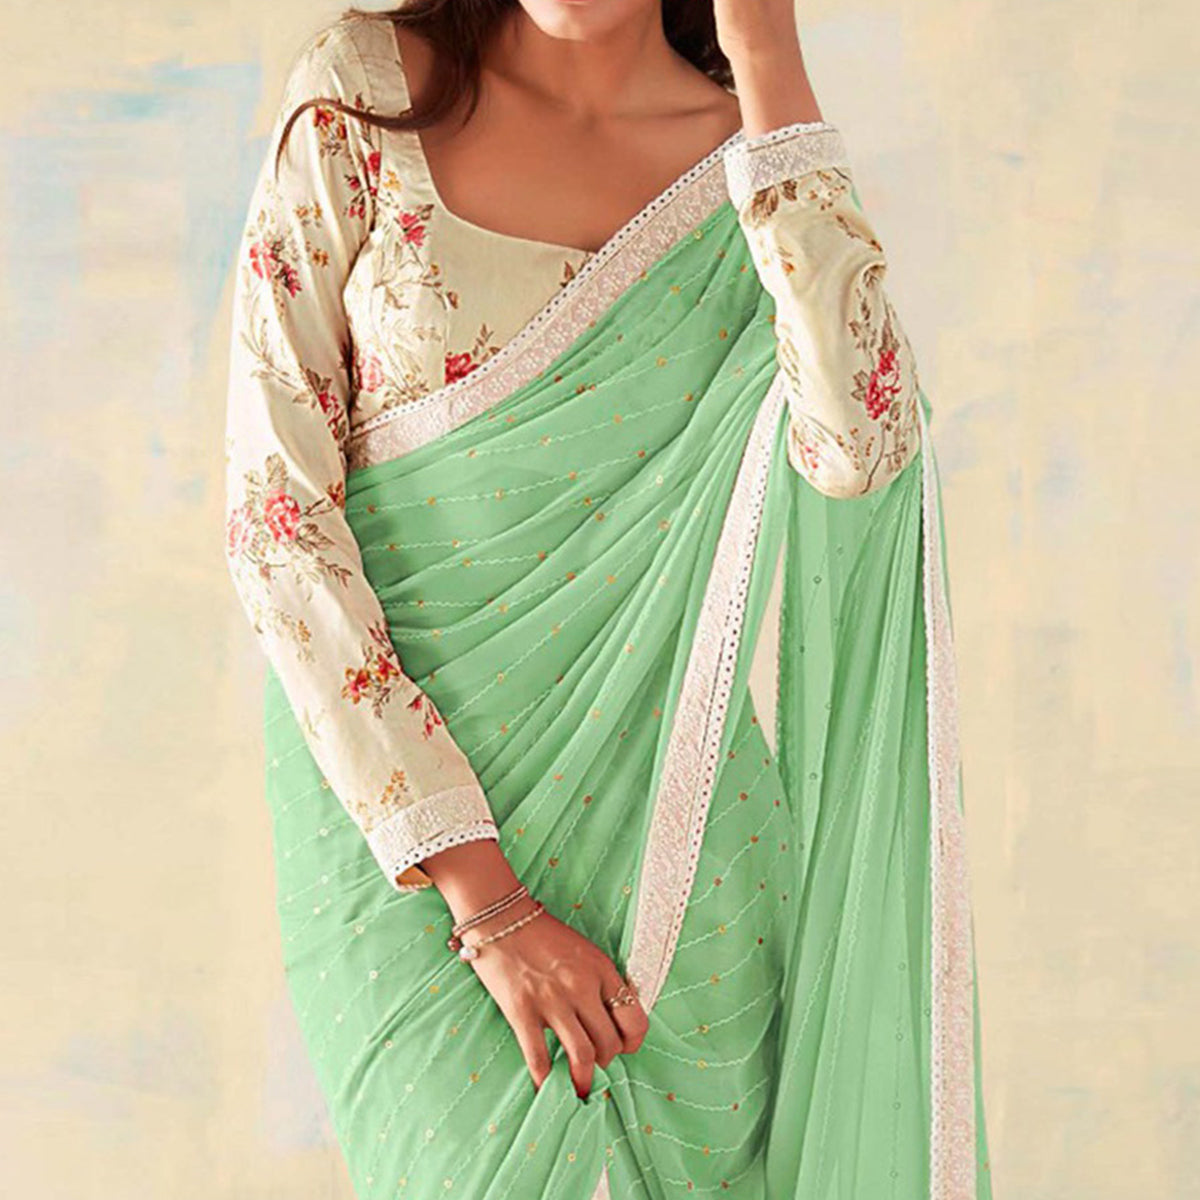 Sea Green Foil Printed Georgette Saree With Embroidered Border